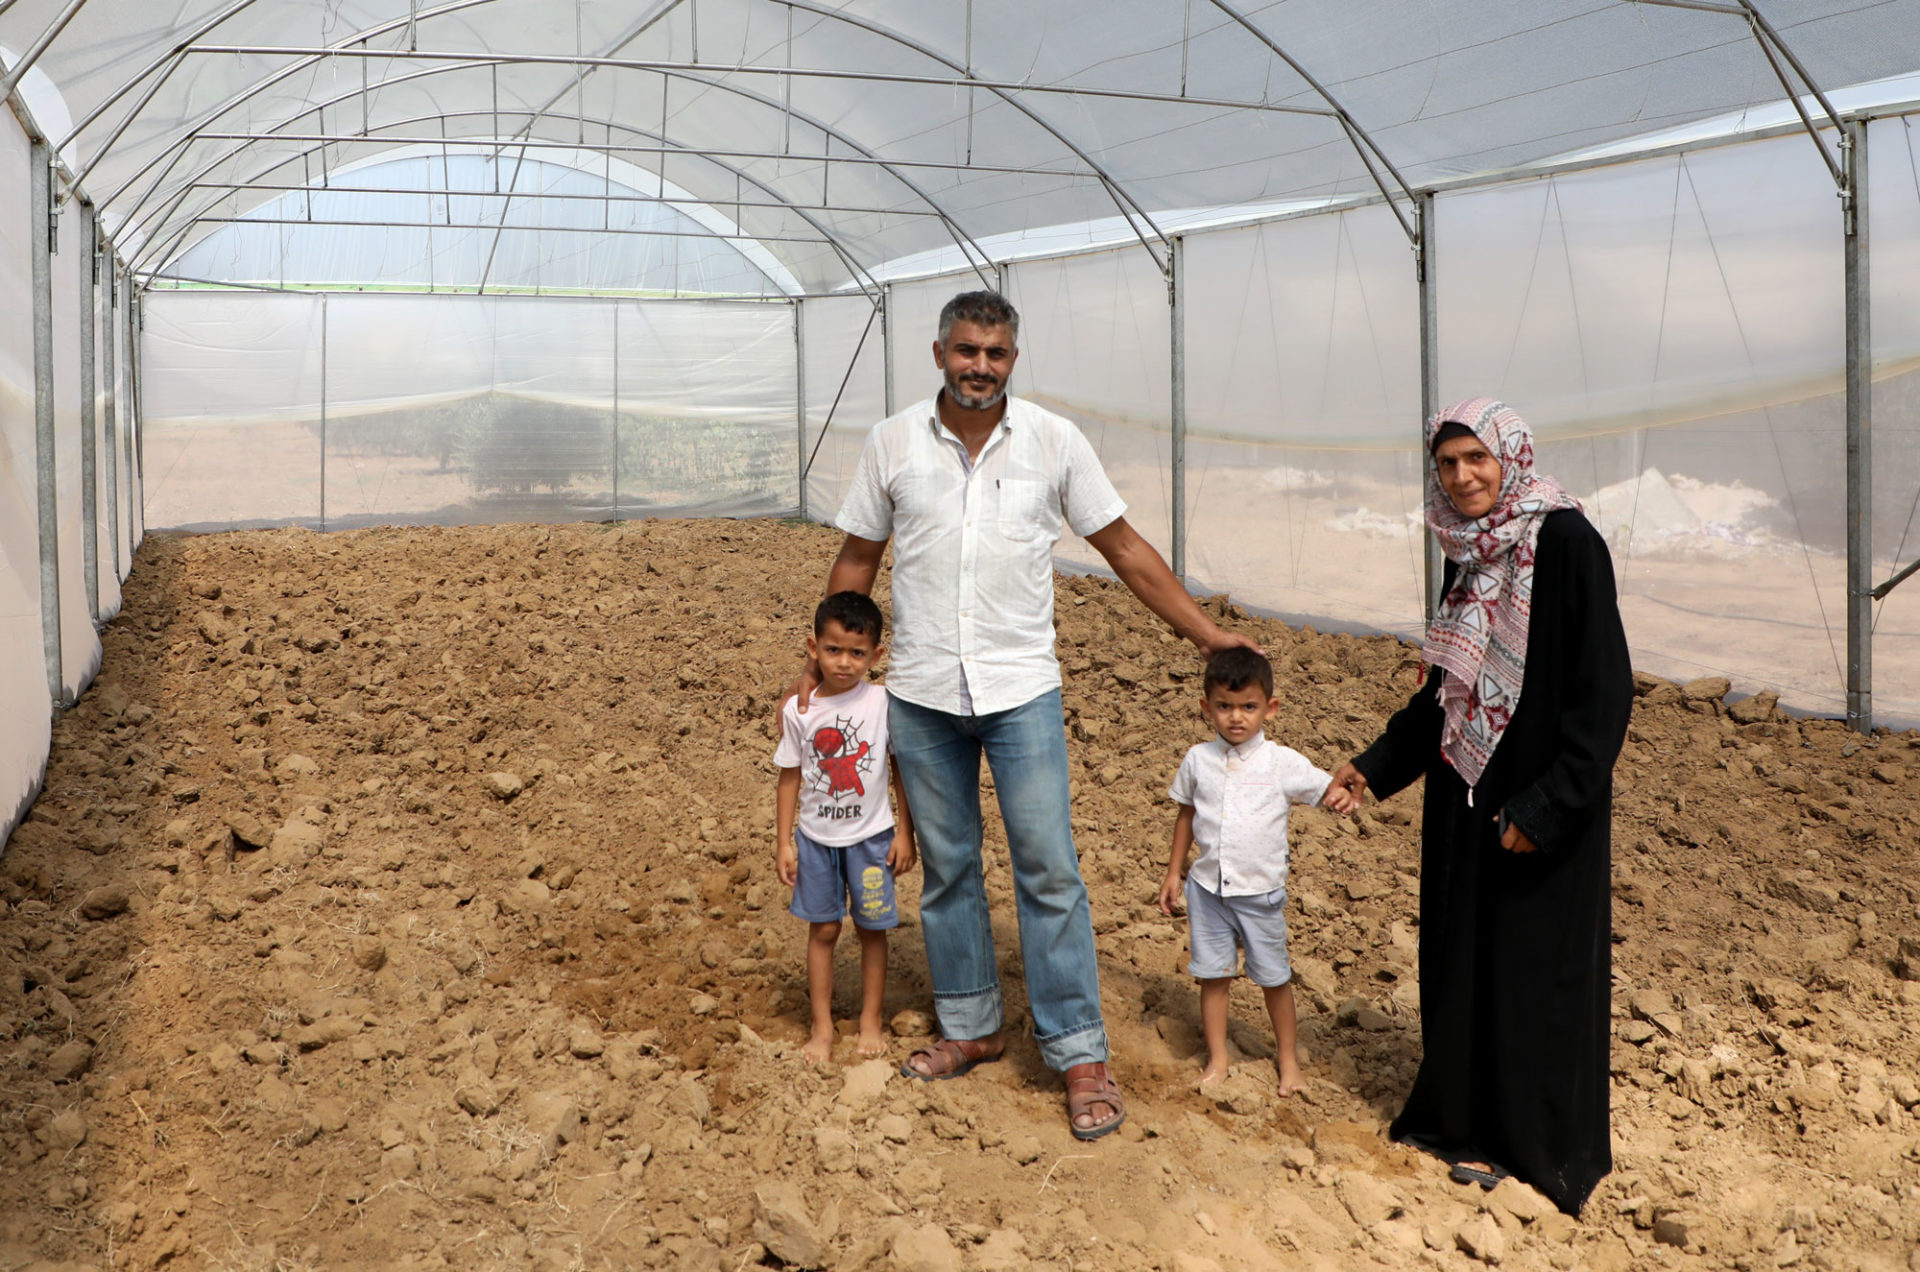 Habiba and her family in their greenhouse